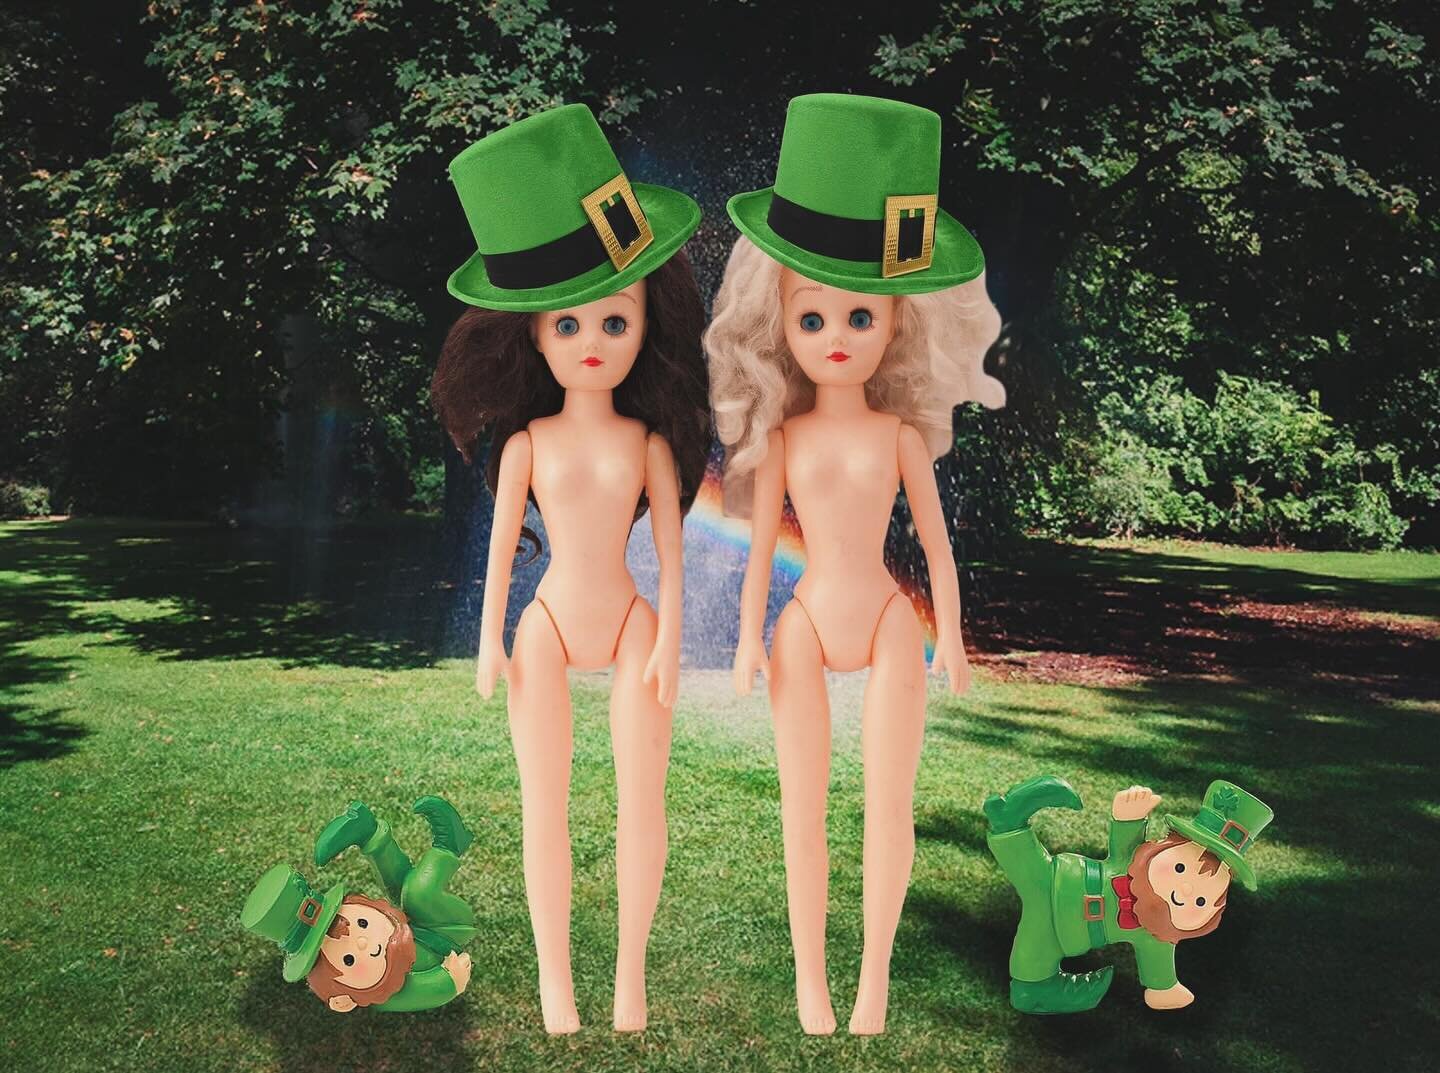 &ldquo;Today, we&rsquo;re getting lucky with our little friends.&rdquo; - Paige

#paige #ginger #paigeandginger #adventures #naked #nude #nudistlife #dolls #dollstyle #dollstory #dollstories #dollstagram #dollsofinstagram #art #stpatricksday #green #